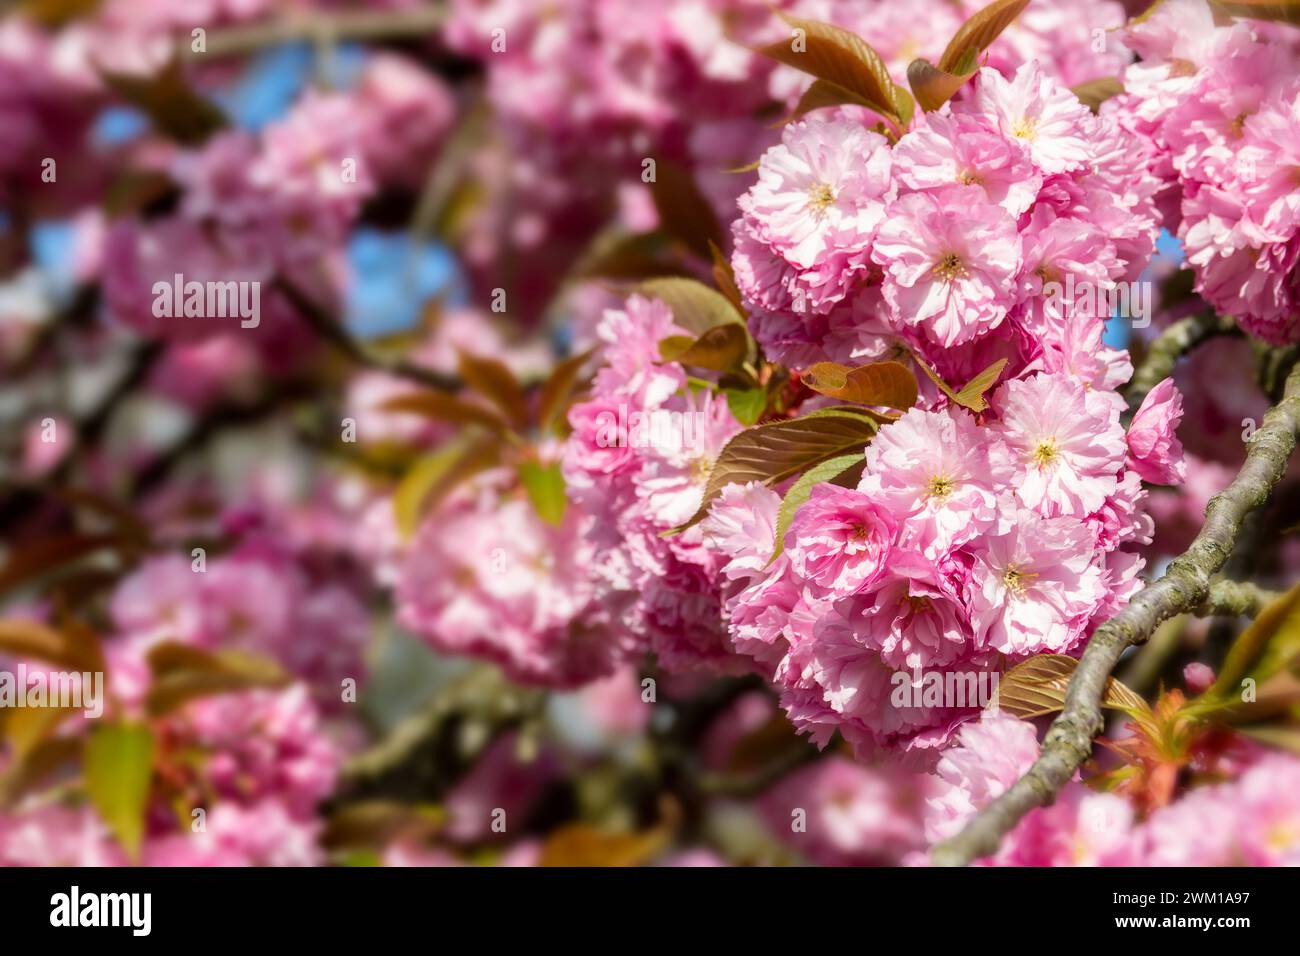 Pink cherry blossom close up, cherry tree flower in spring, hanami season in Japan Stock Photo